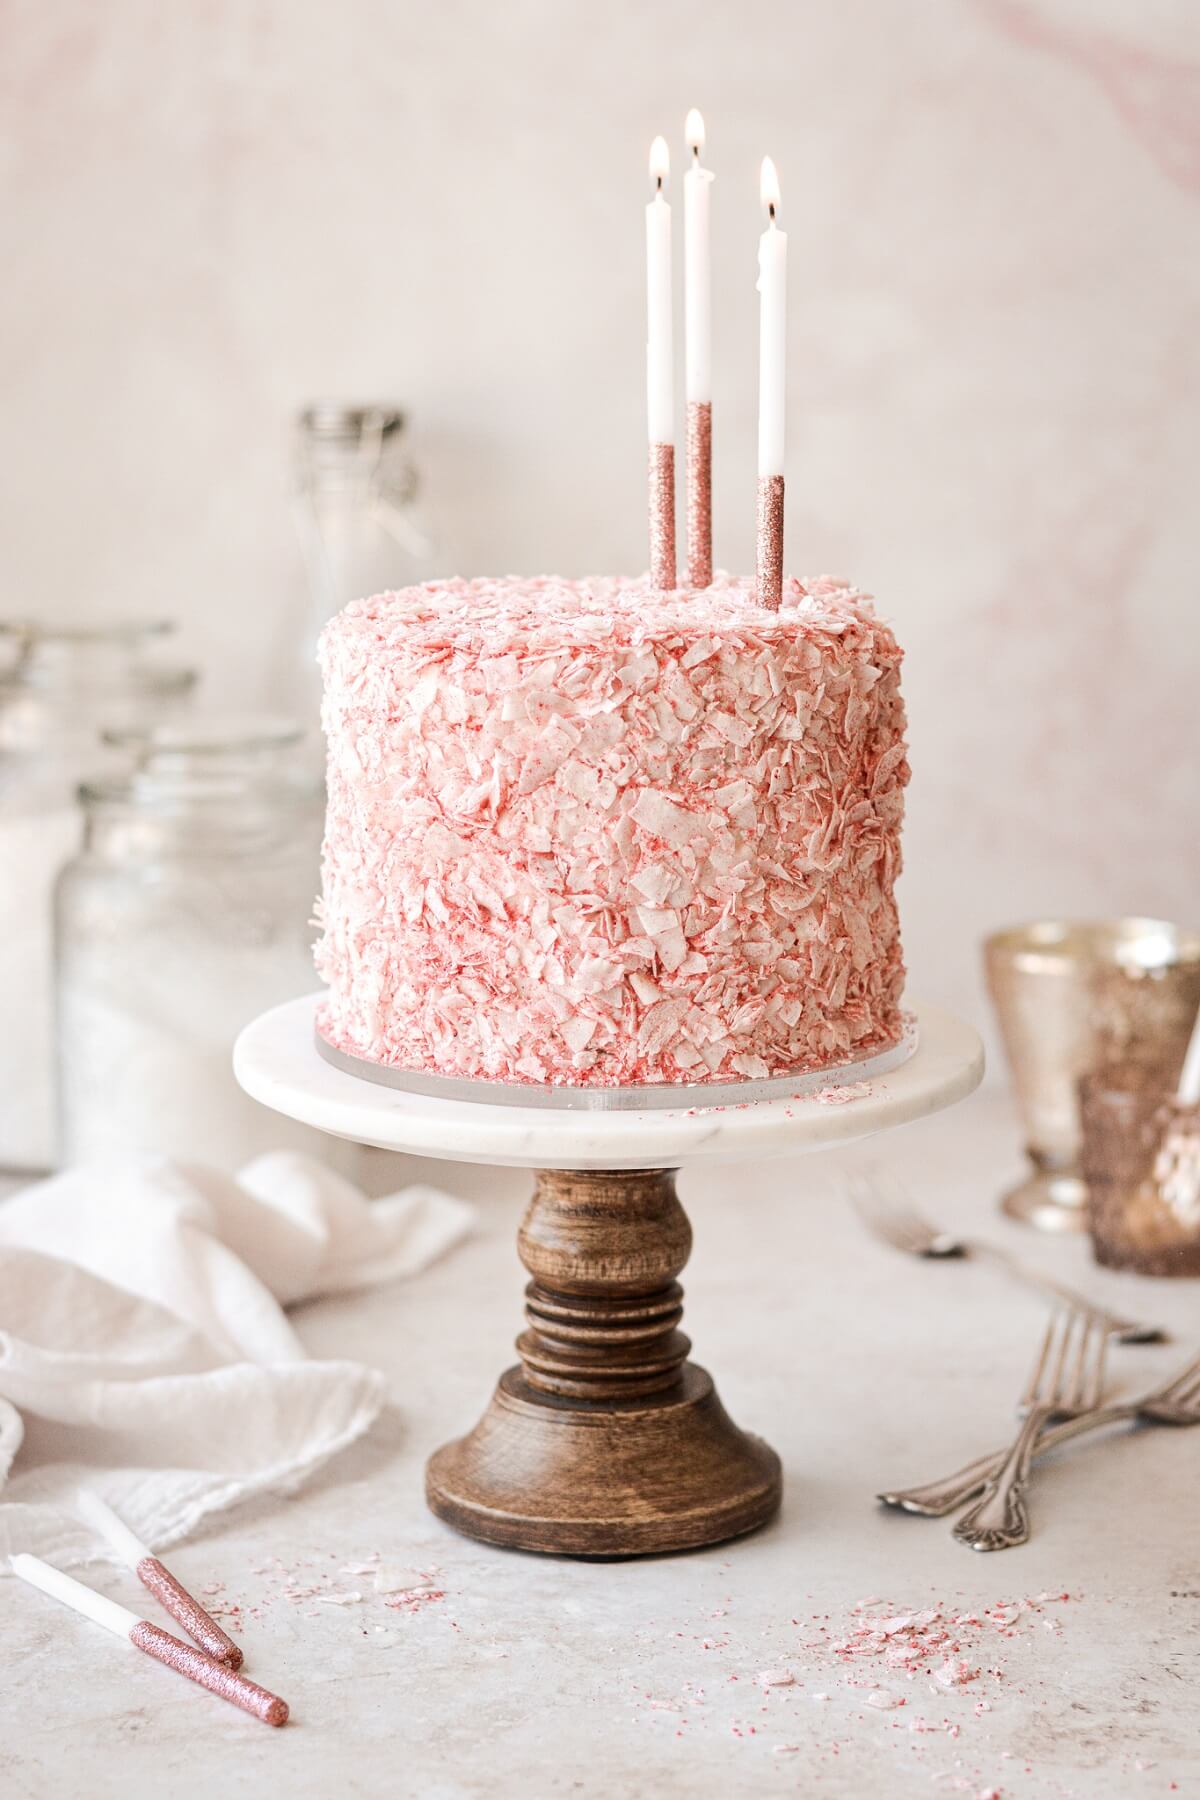 Strawberry coconut cake with pink and white candles.